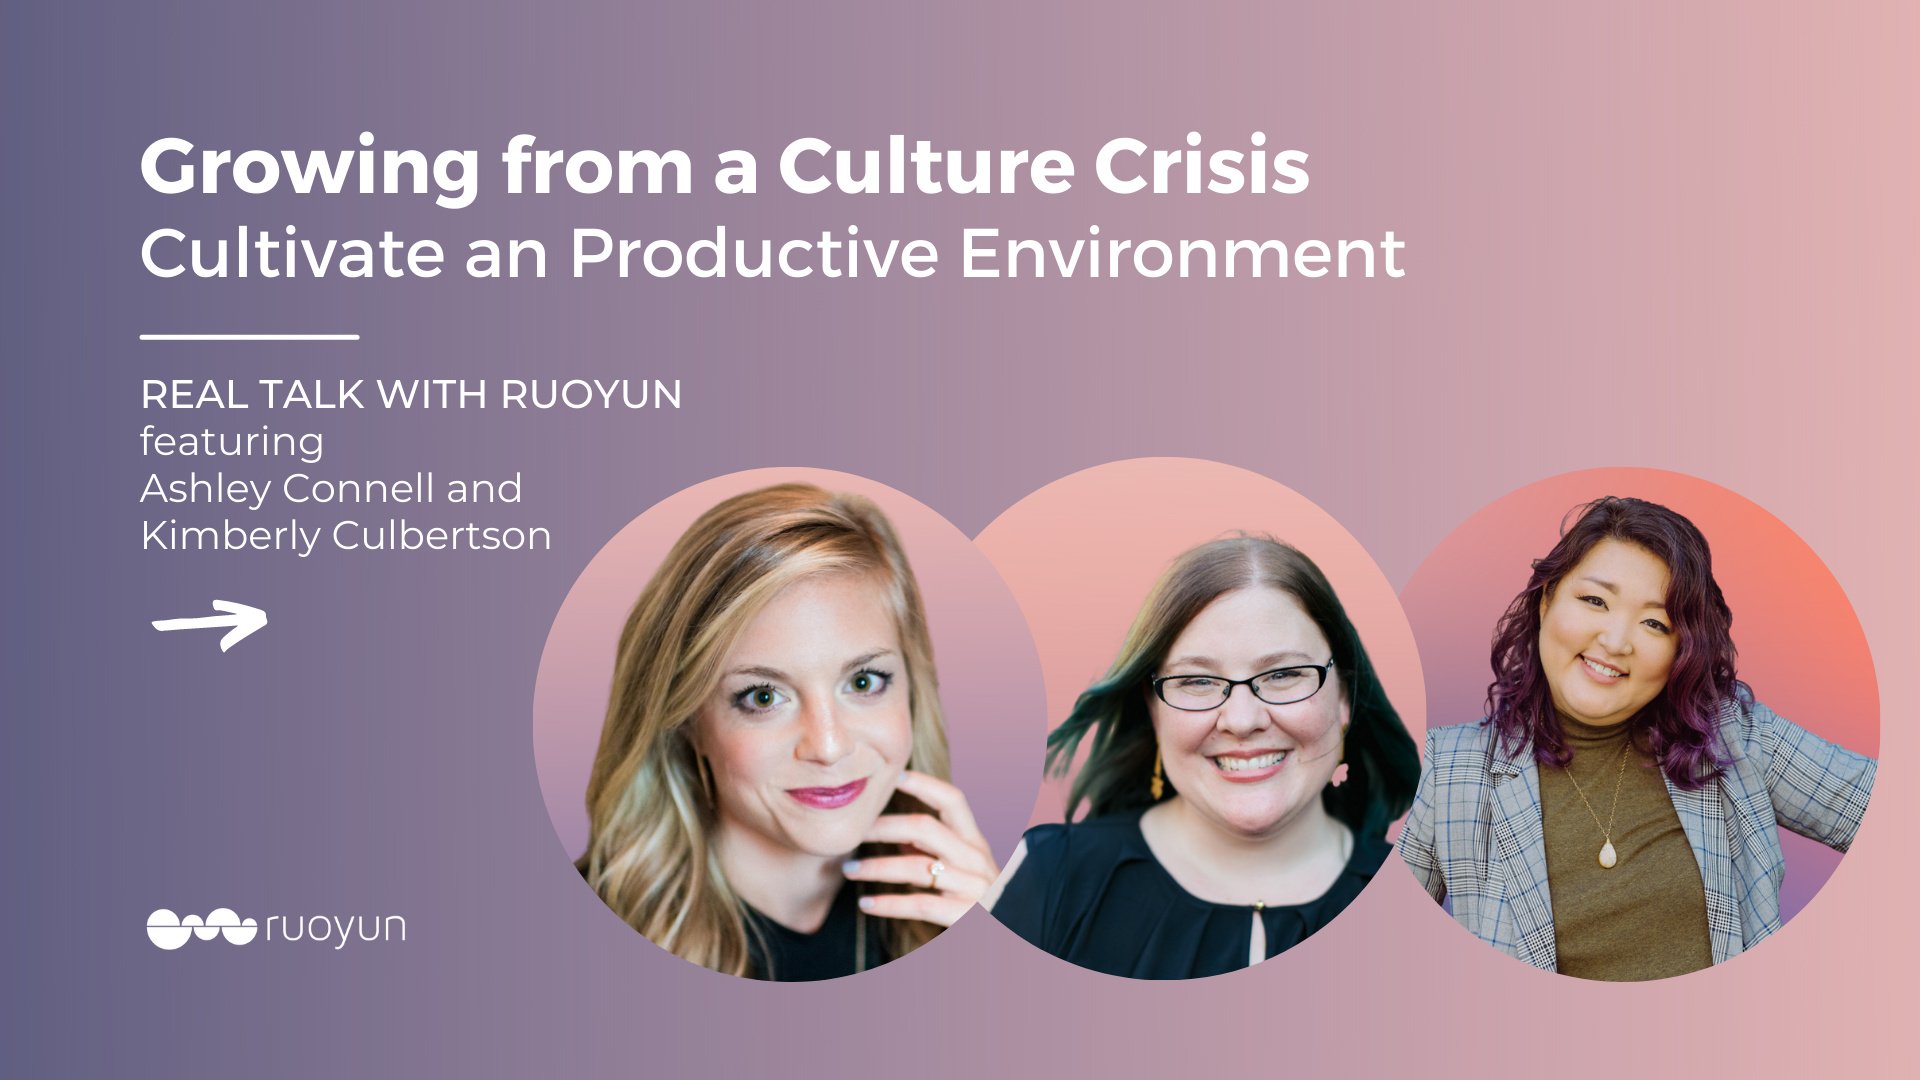 Growing from a Culture Crisis with Ashley Connell & Kimberly Culbertson – Real Talk with Ruoyun